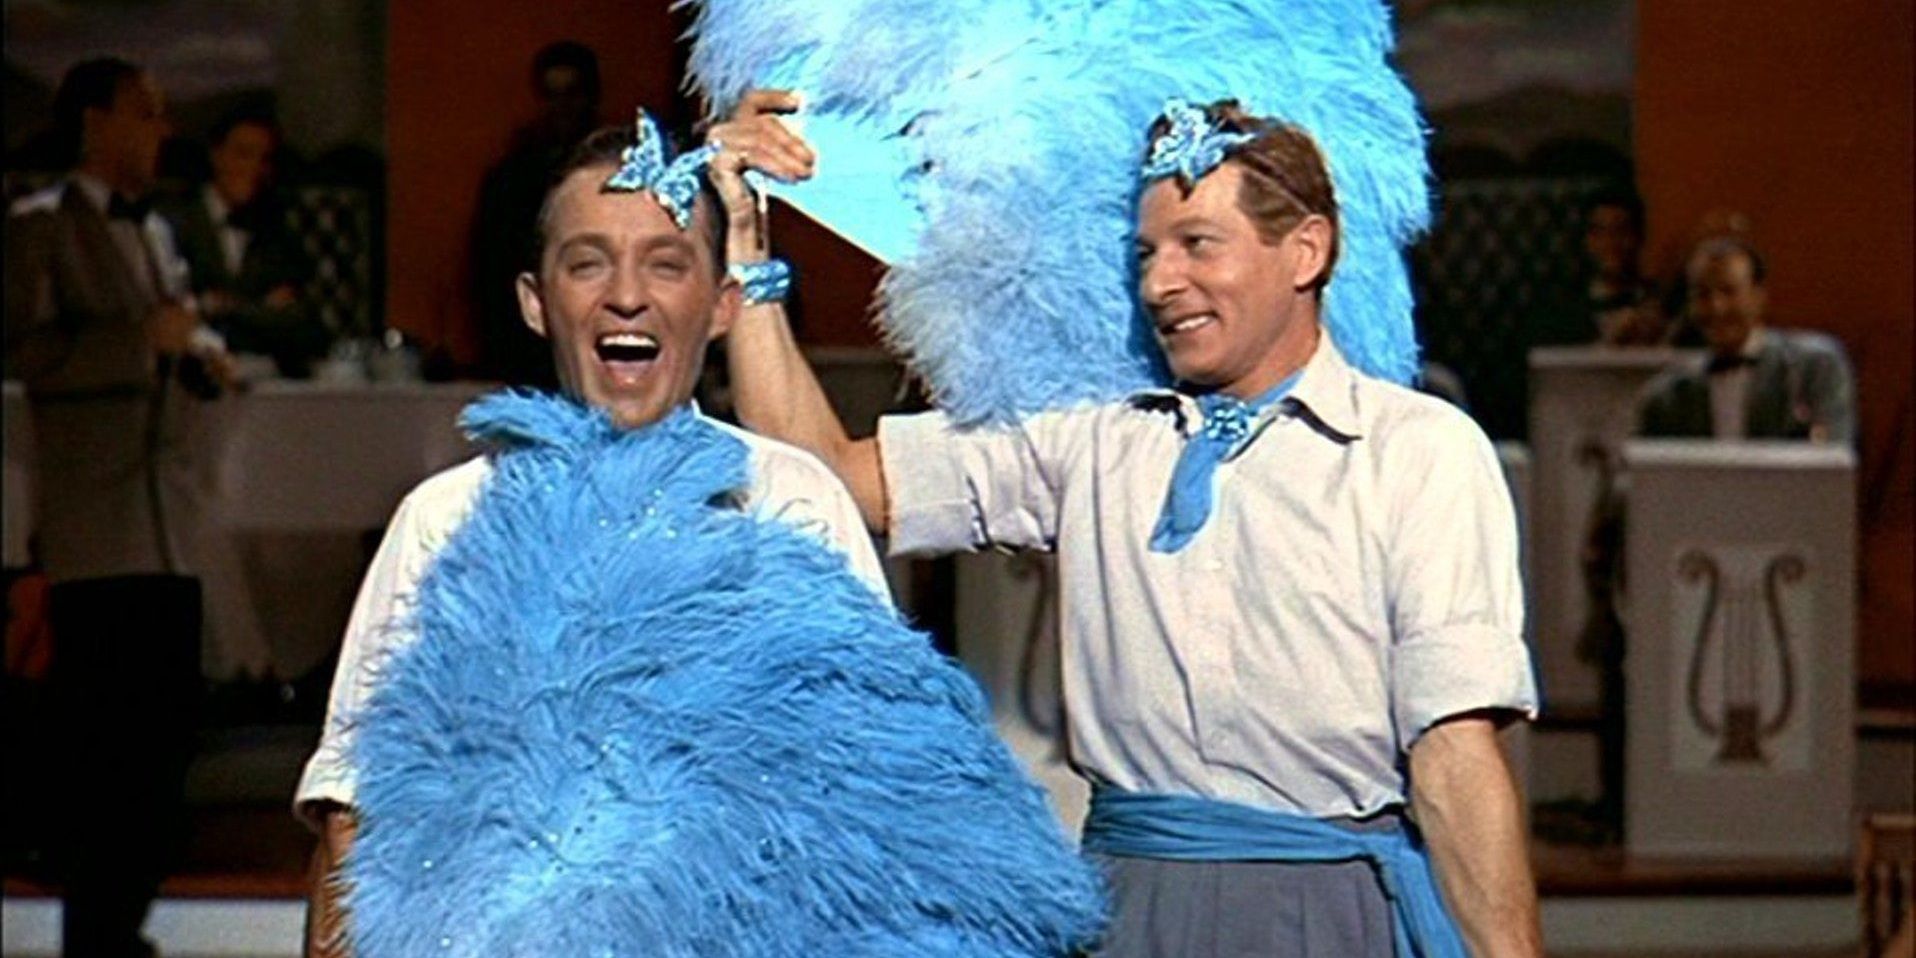 10 Things You Didn’t Know About The Making Of White Christmas